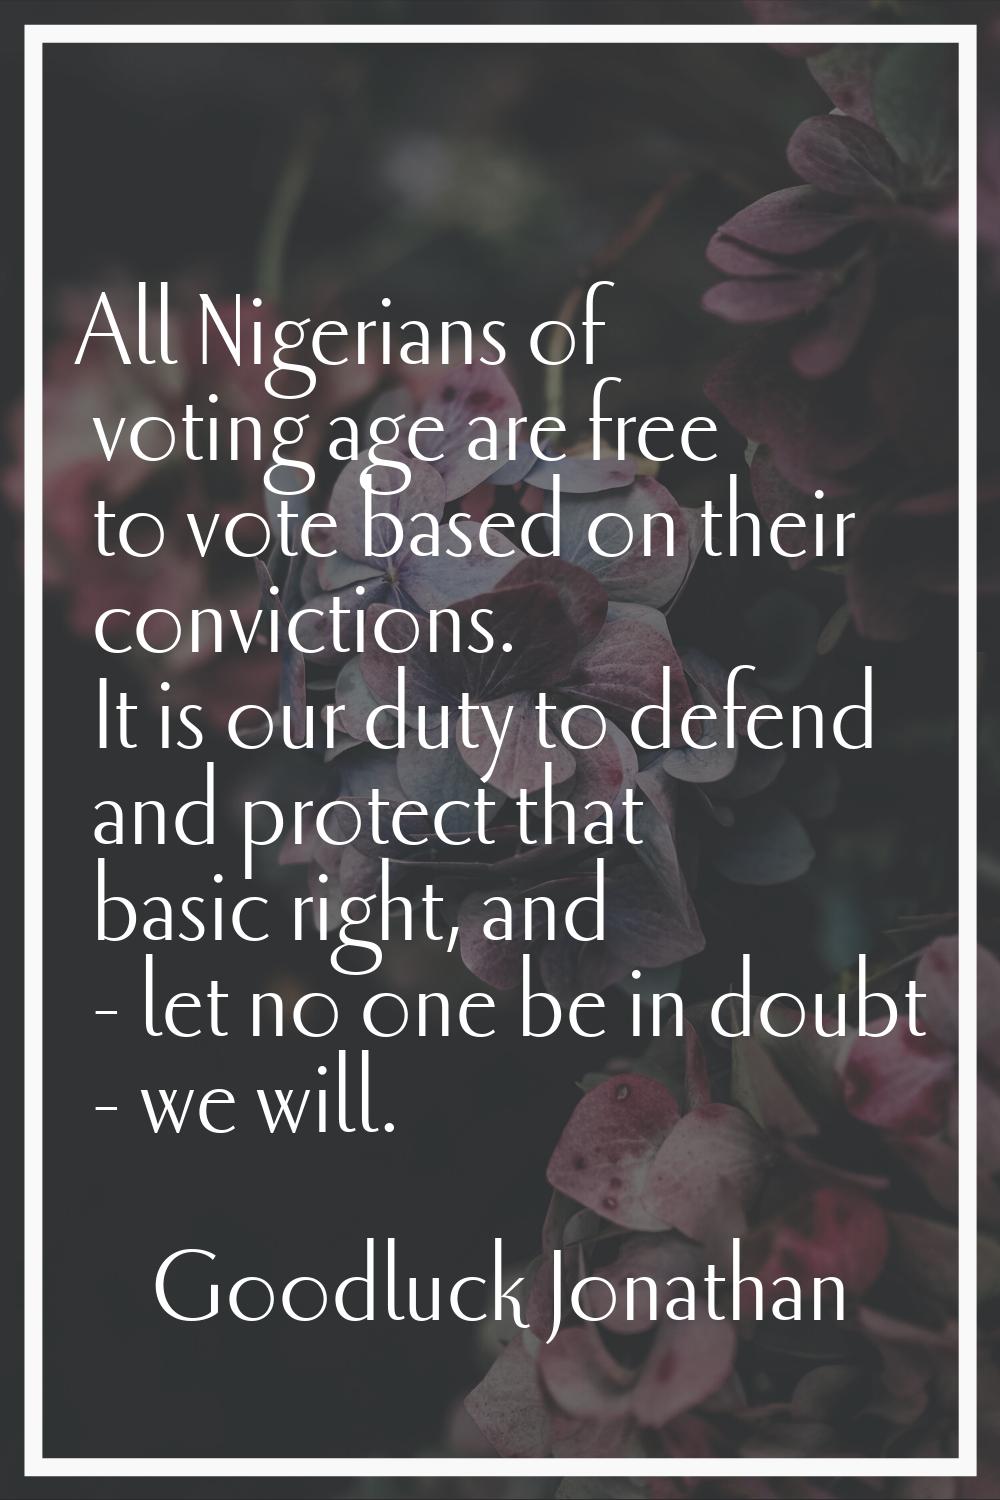 All Nigerians of voting age are free to vote based on their convictions. It is our duty to defend a